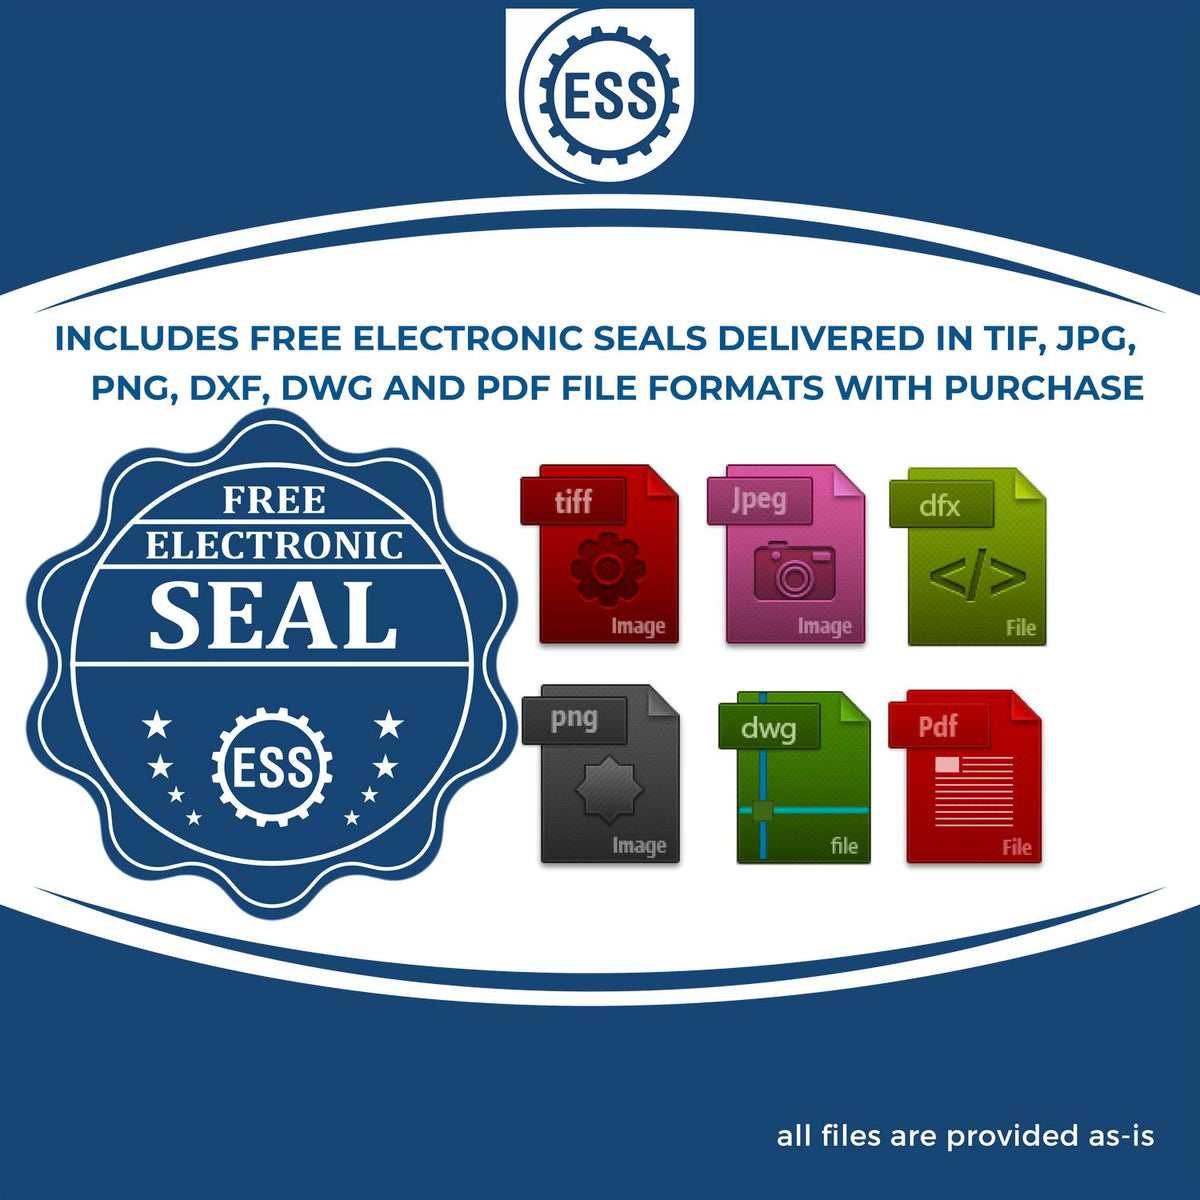 An infographic for the free electronic seal for the Hybrid Delaware Architect Seal illustrating the different file type icons such as DXF, DWG, TIF, JPG and PNG.